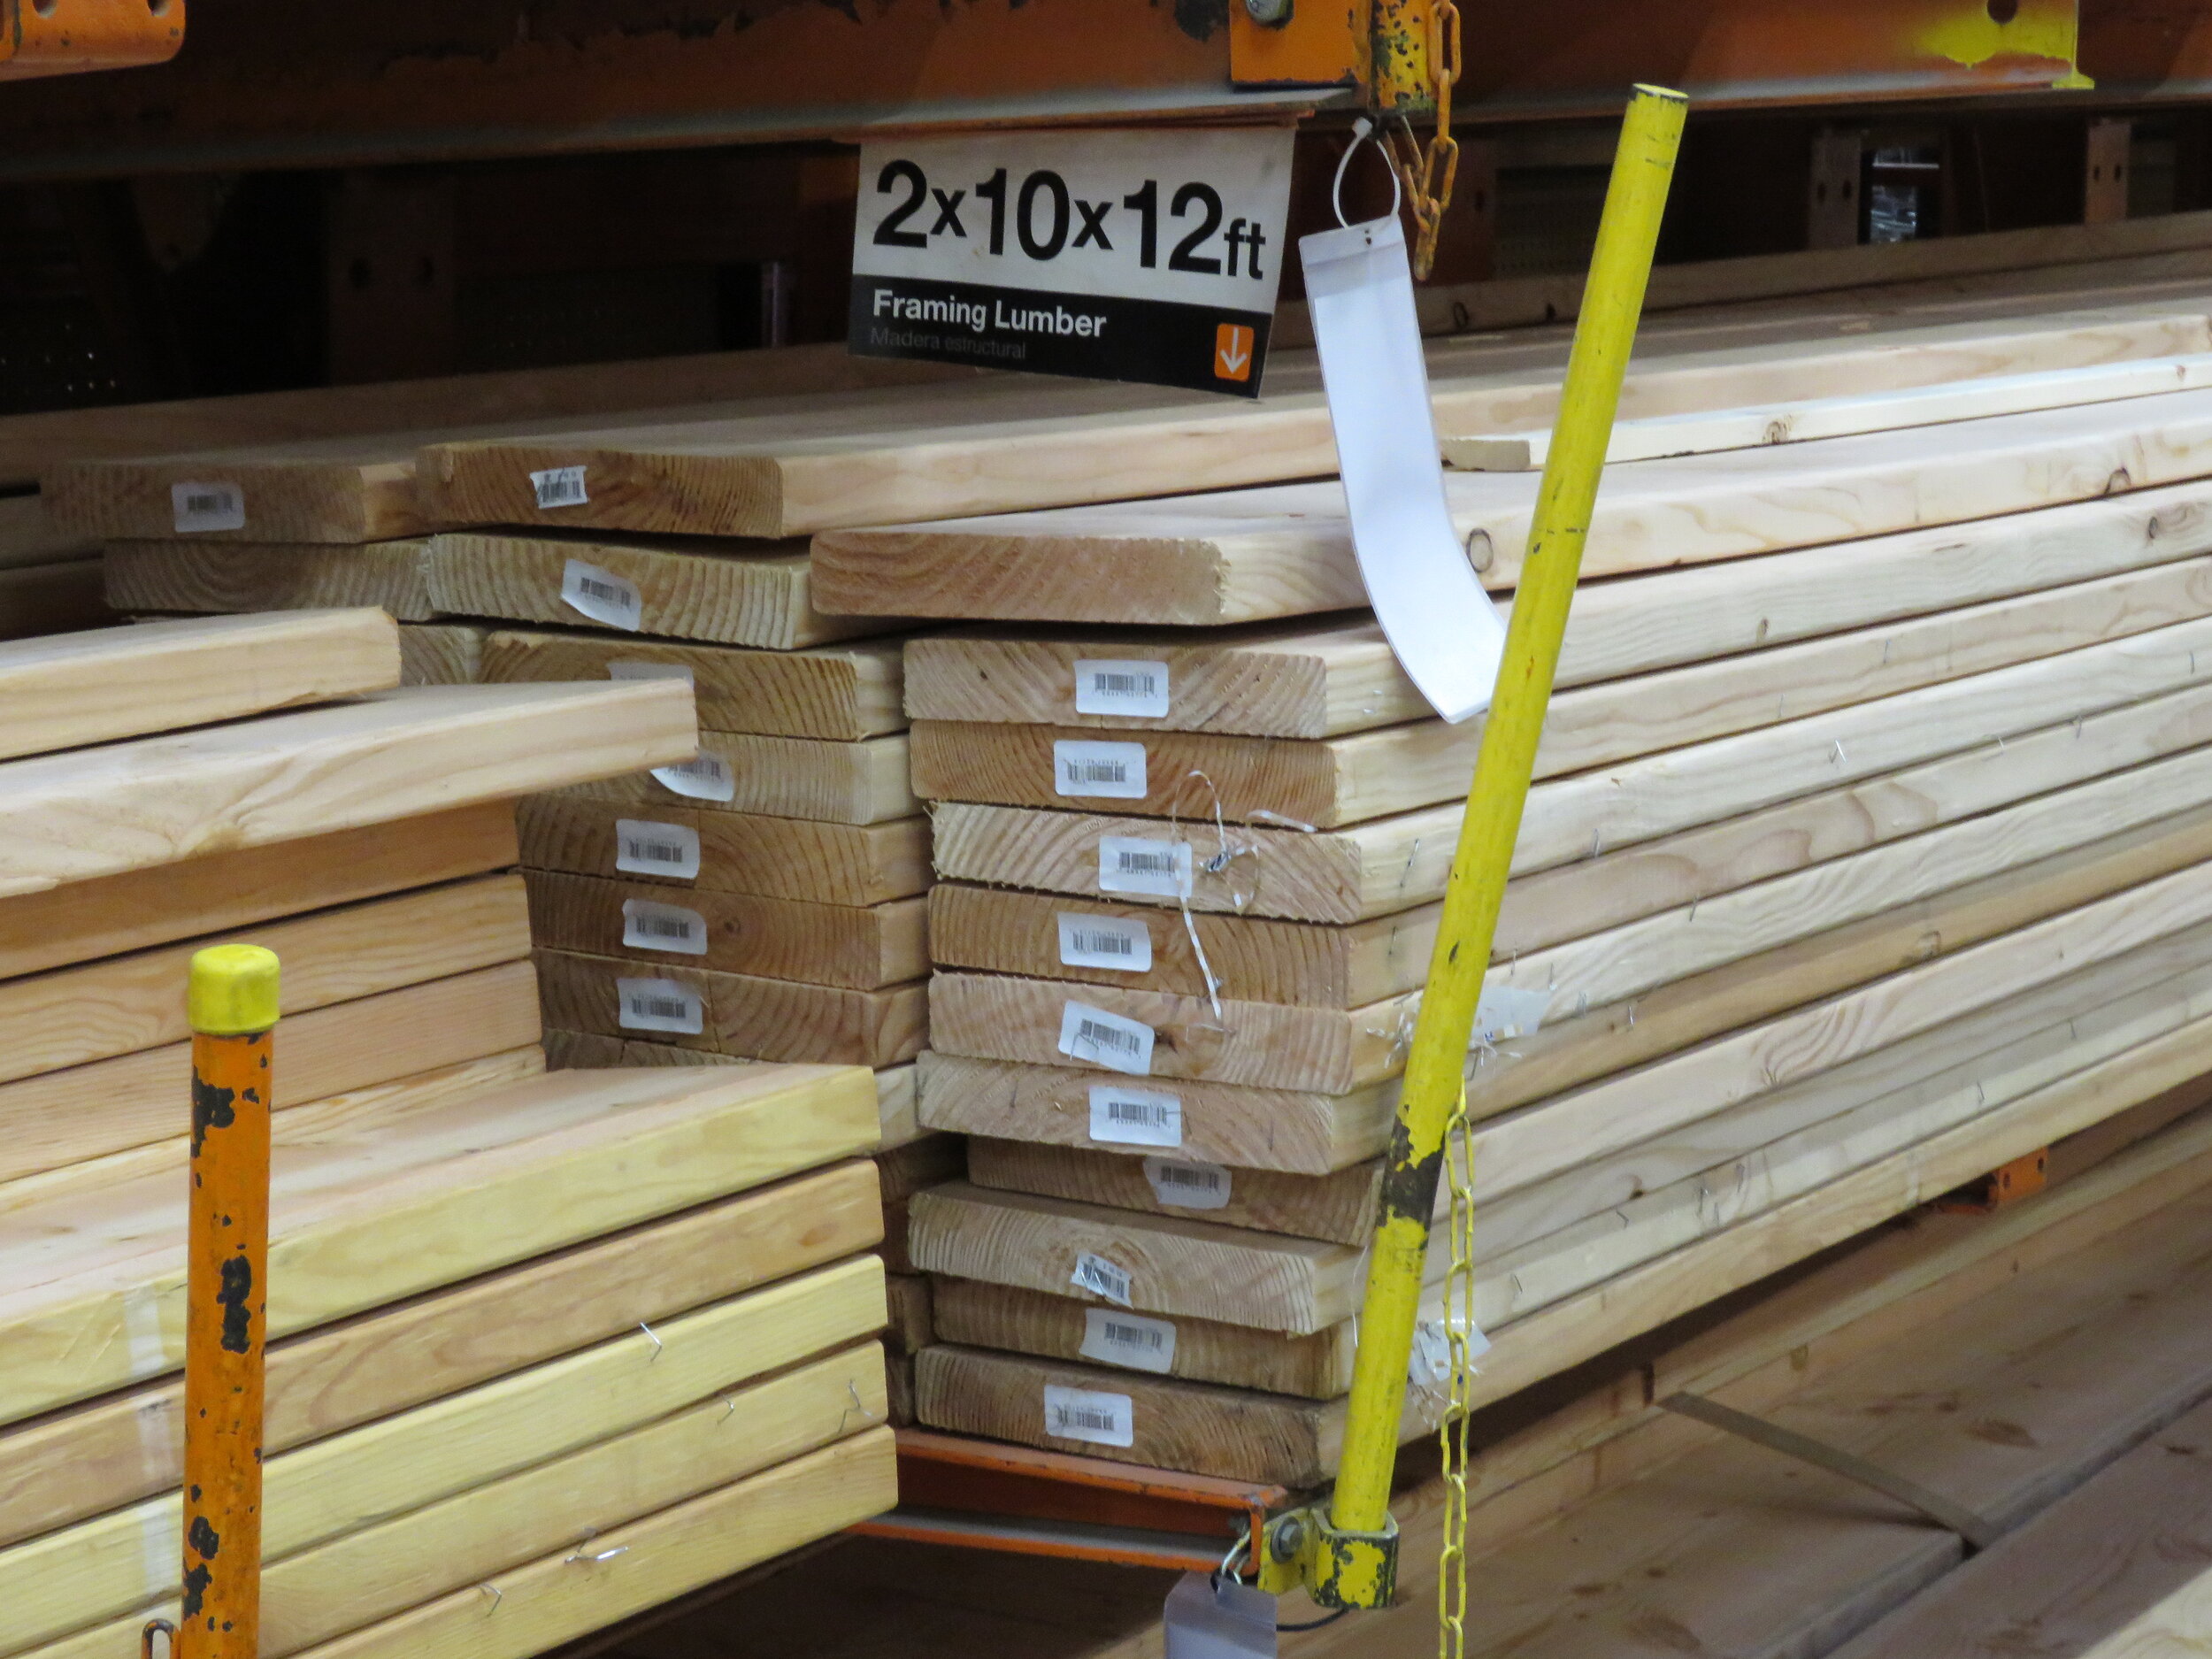 A stack of dimensional lumber.